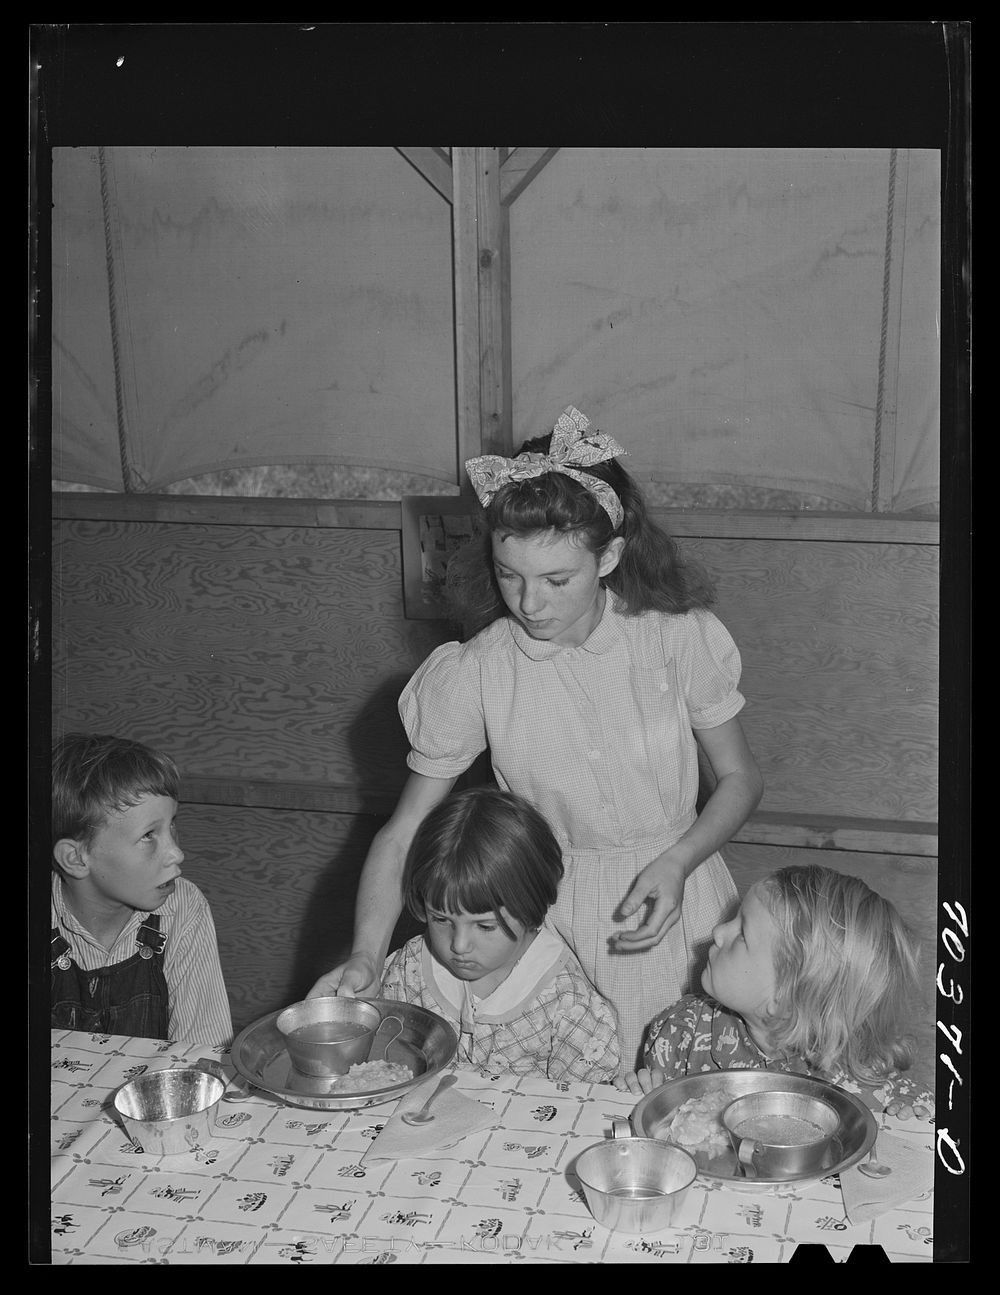 Lunchtime at the nursery school at the FSA (Farm Security Administration) mobile camp for migratory farm workers. At Odell…